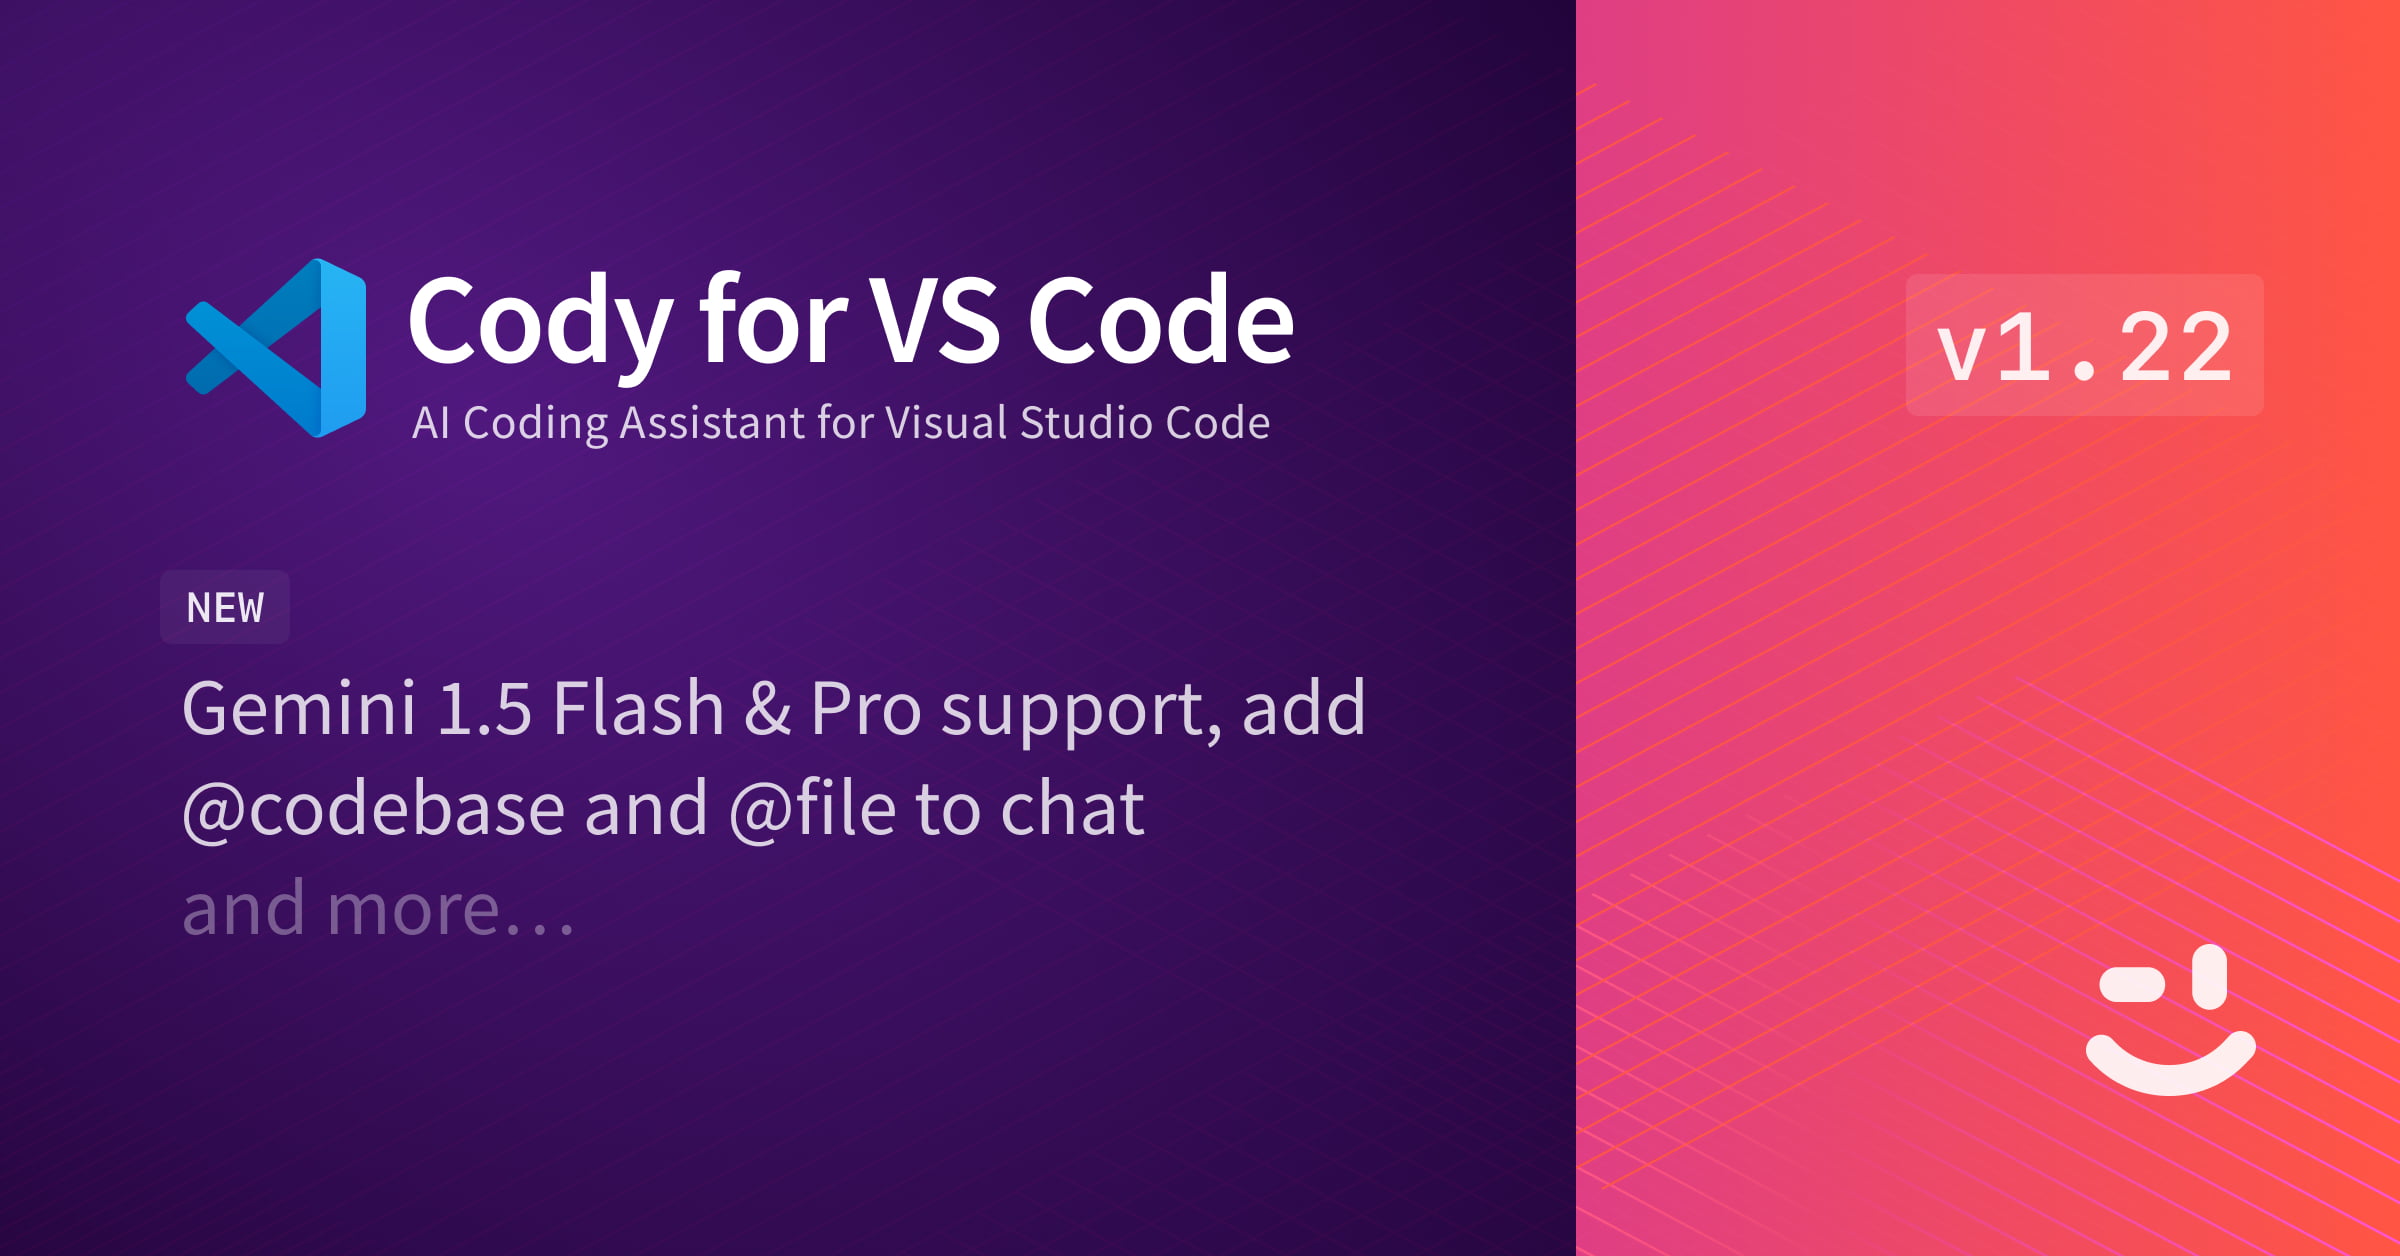 Cody for VS Code v1.22: Introducing Gemini 1.5 Flash and Pro support